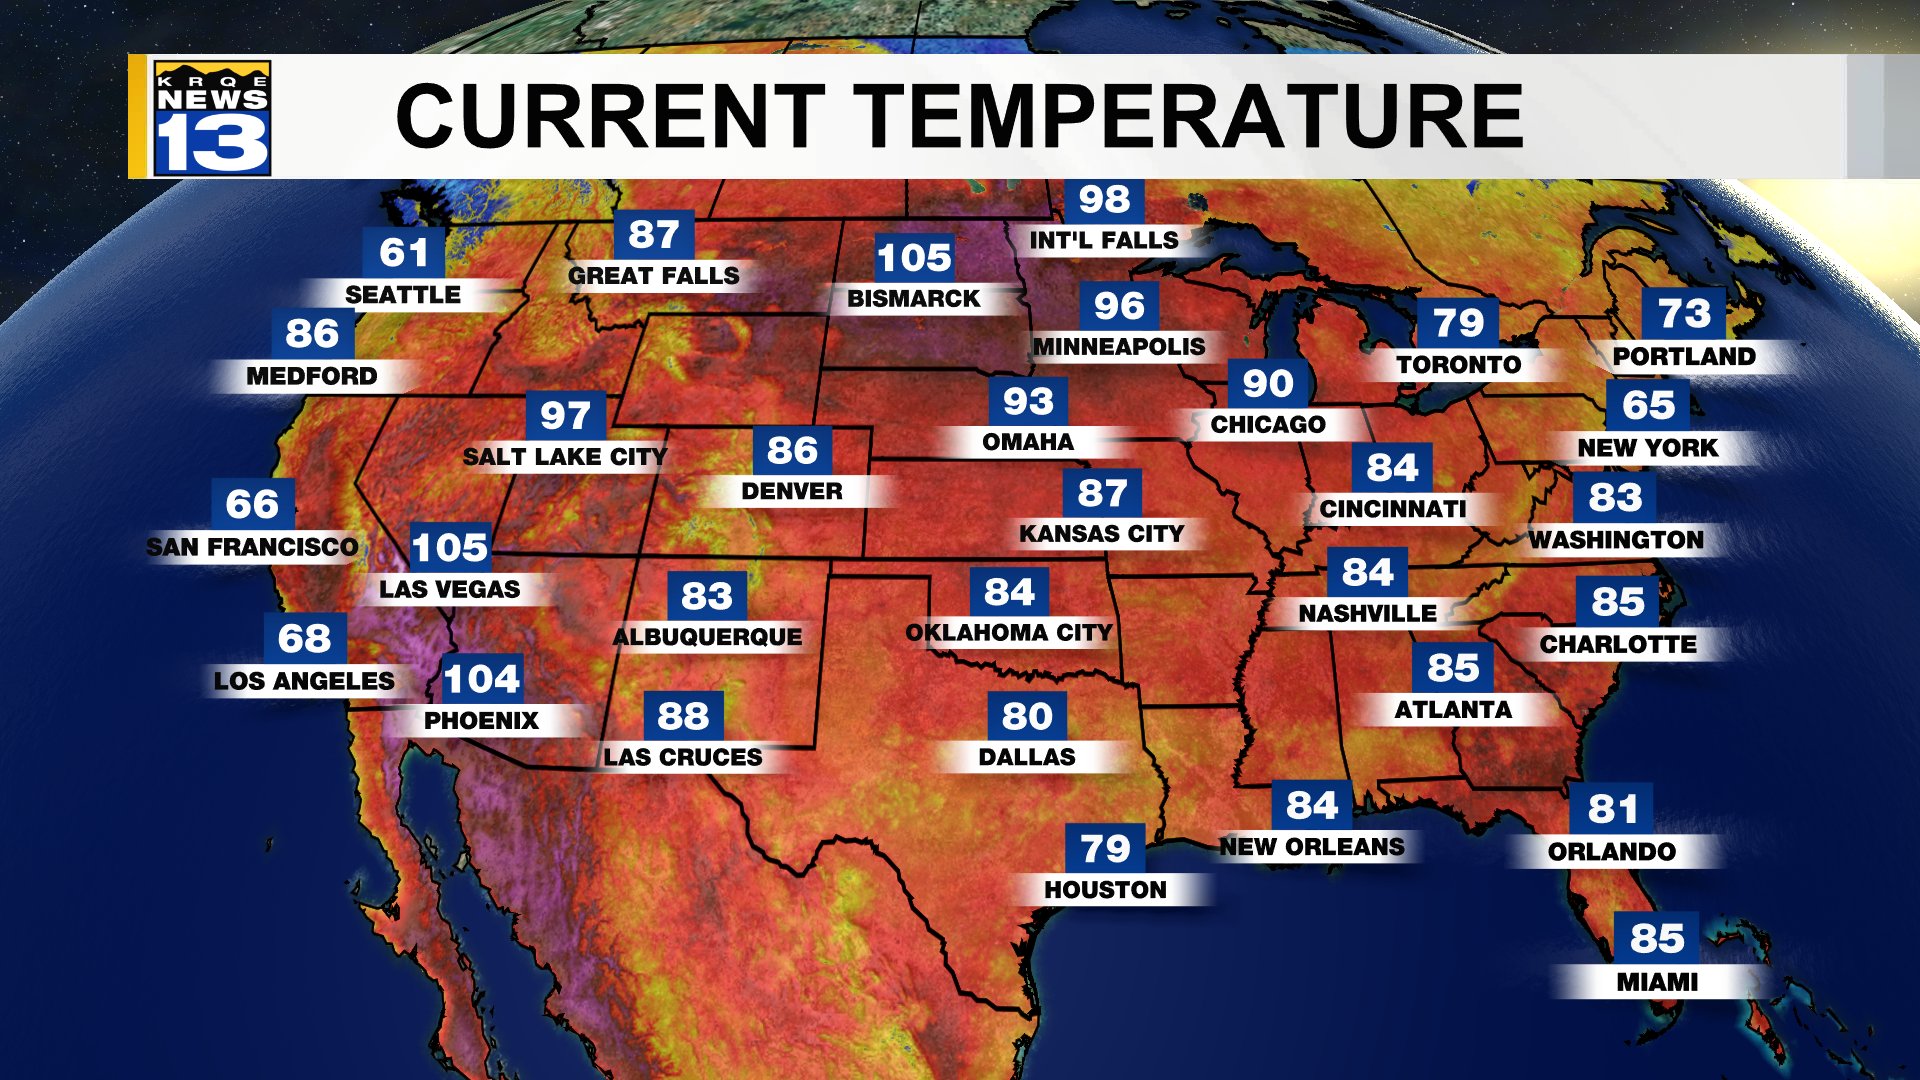 Grant Tosterud on X: "Bismarck, ND the same temperatures as Las Vegas, NV,  and hotter than Phoenix, AZ. https://t.co/vQVuF95vuQ" / X